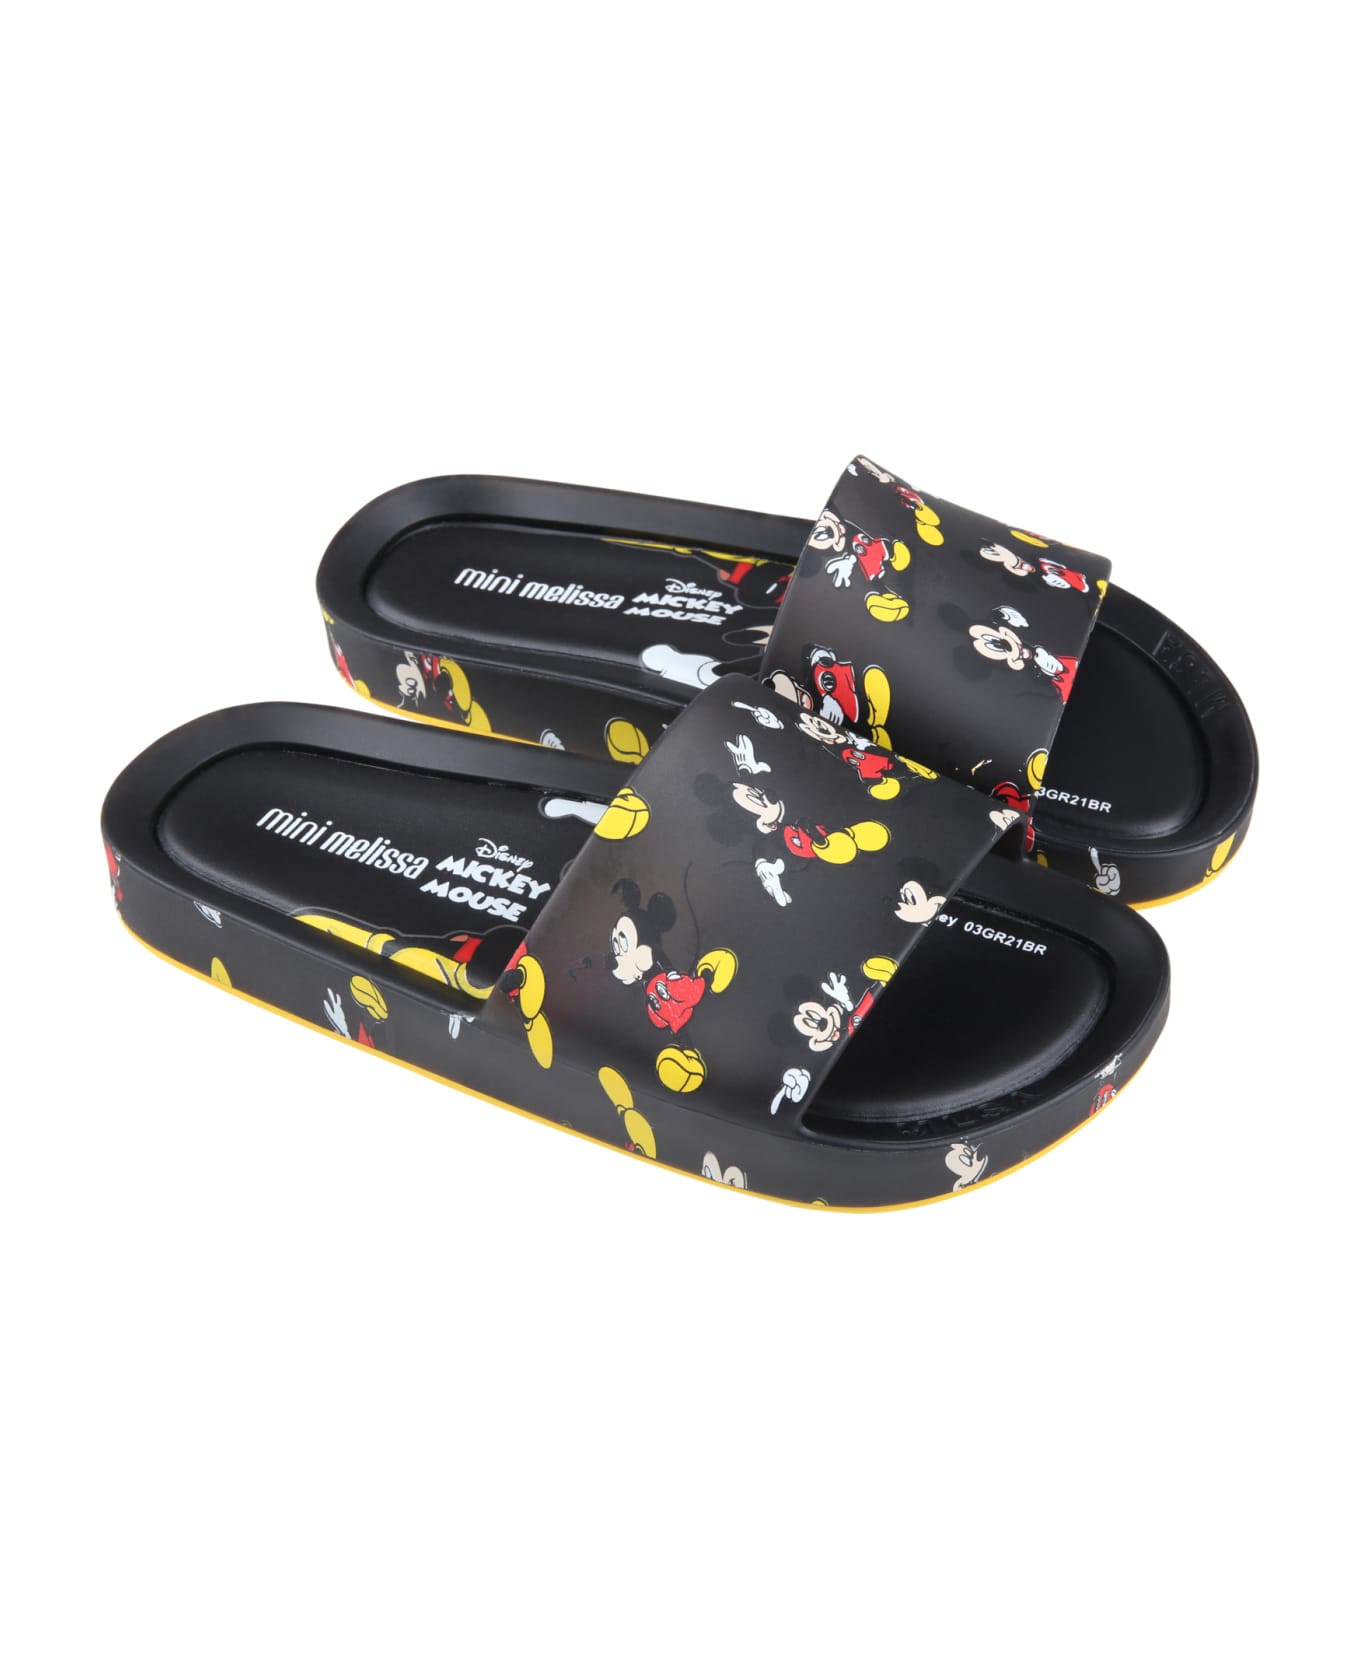 Melissa Black Sandals For Boy With Mickey Mouse - Black